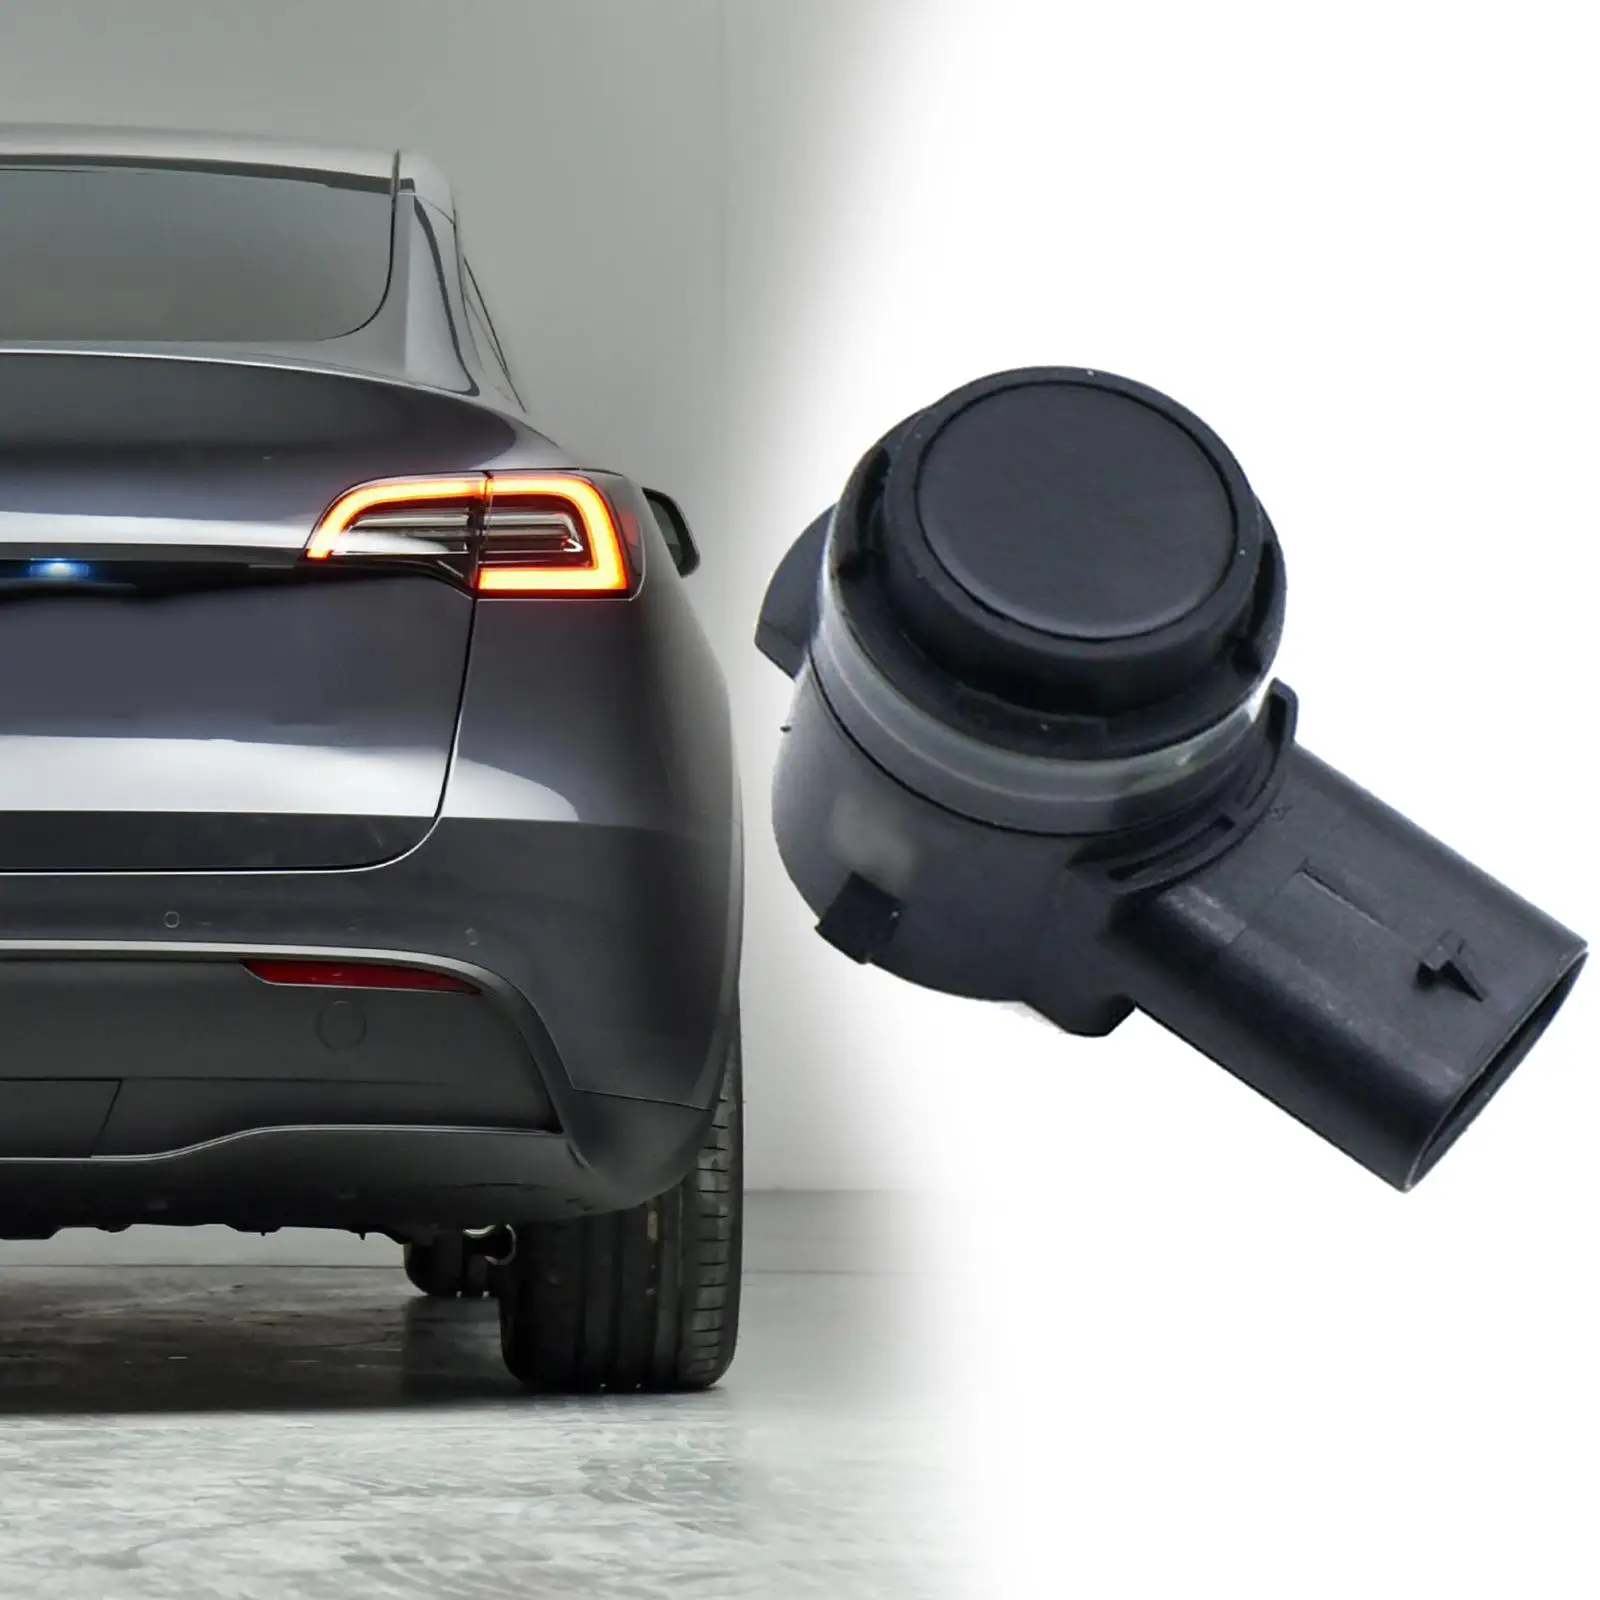 Reverse Backup Parking Sensor 1127503-01-c Replacements for Tesla Model x S 3 2017-2019 Durable Easily Install Professional